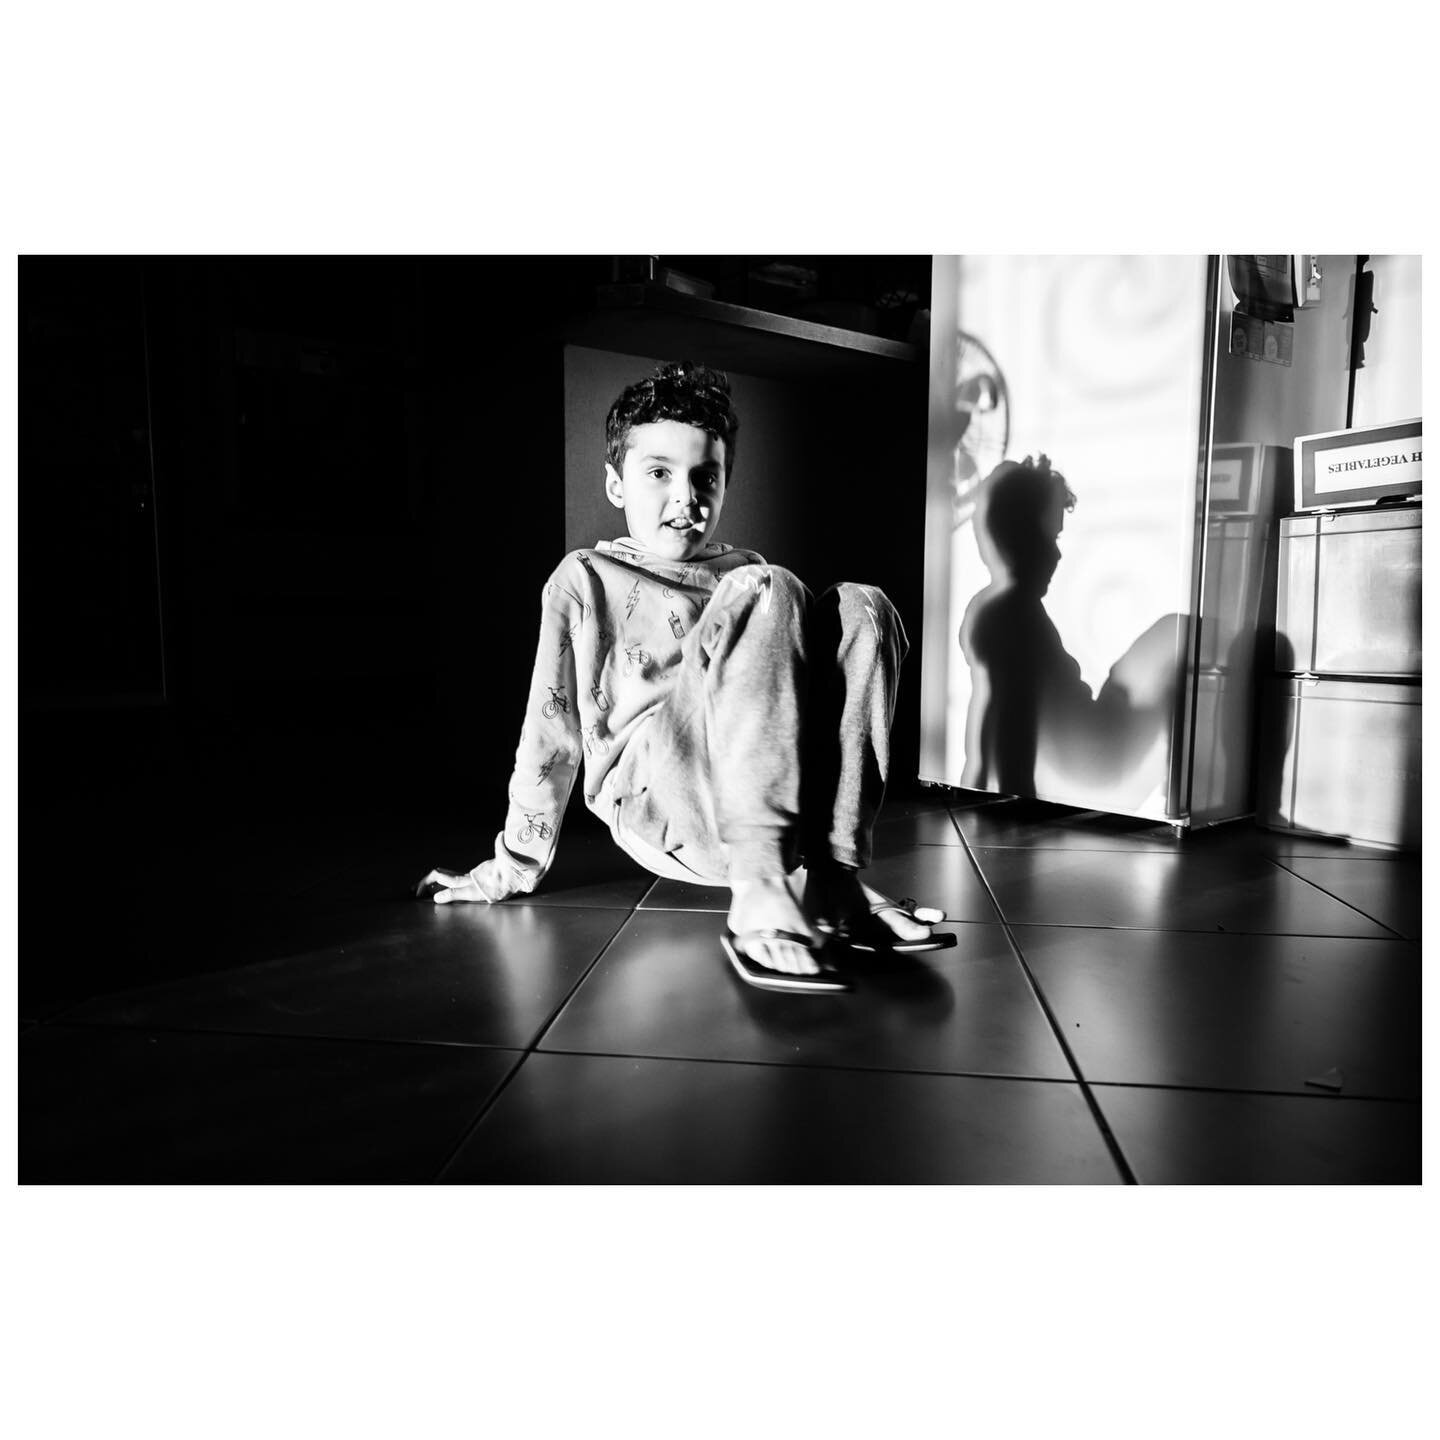 Playing In the Shadows!

At the end of each day, the most amazing light falls into our living room as casts beautiful shadows. 
Took a few shots of my boy playing with my trusty Fuji X100F
&bull;
&bull;
&bull;
#fujix100f #x100fujifilm #fujifilm #soci